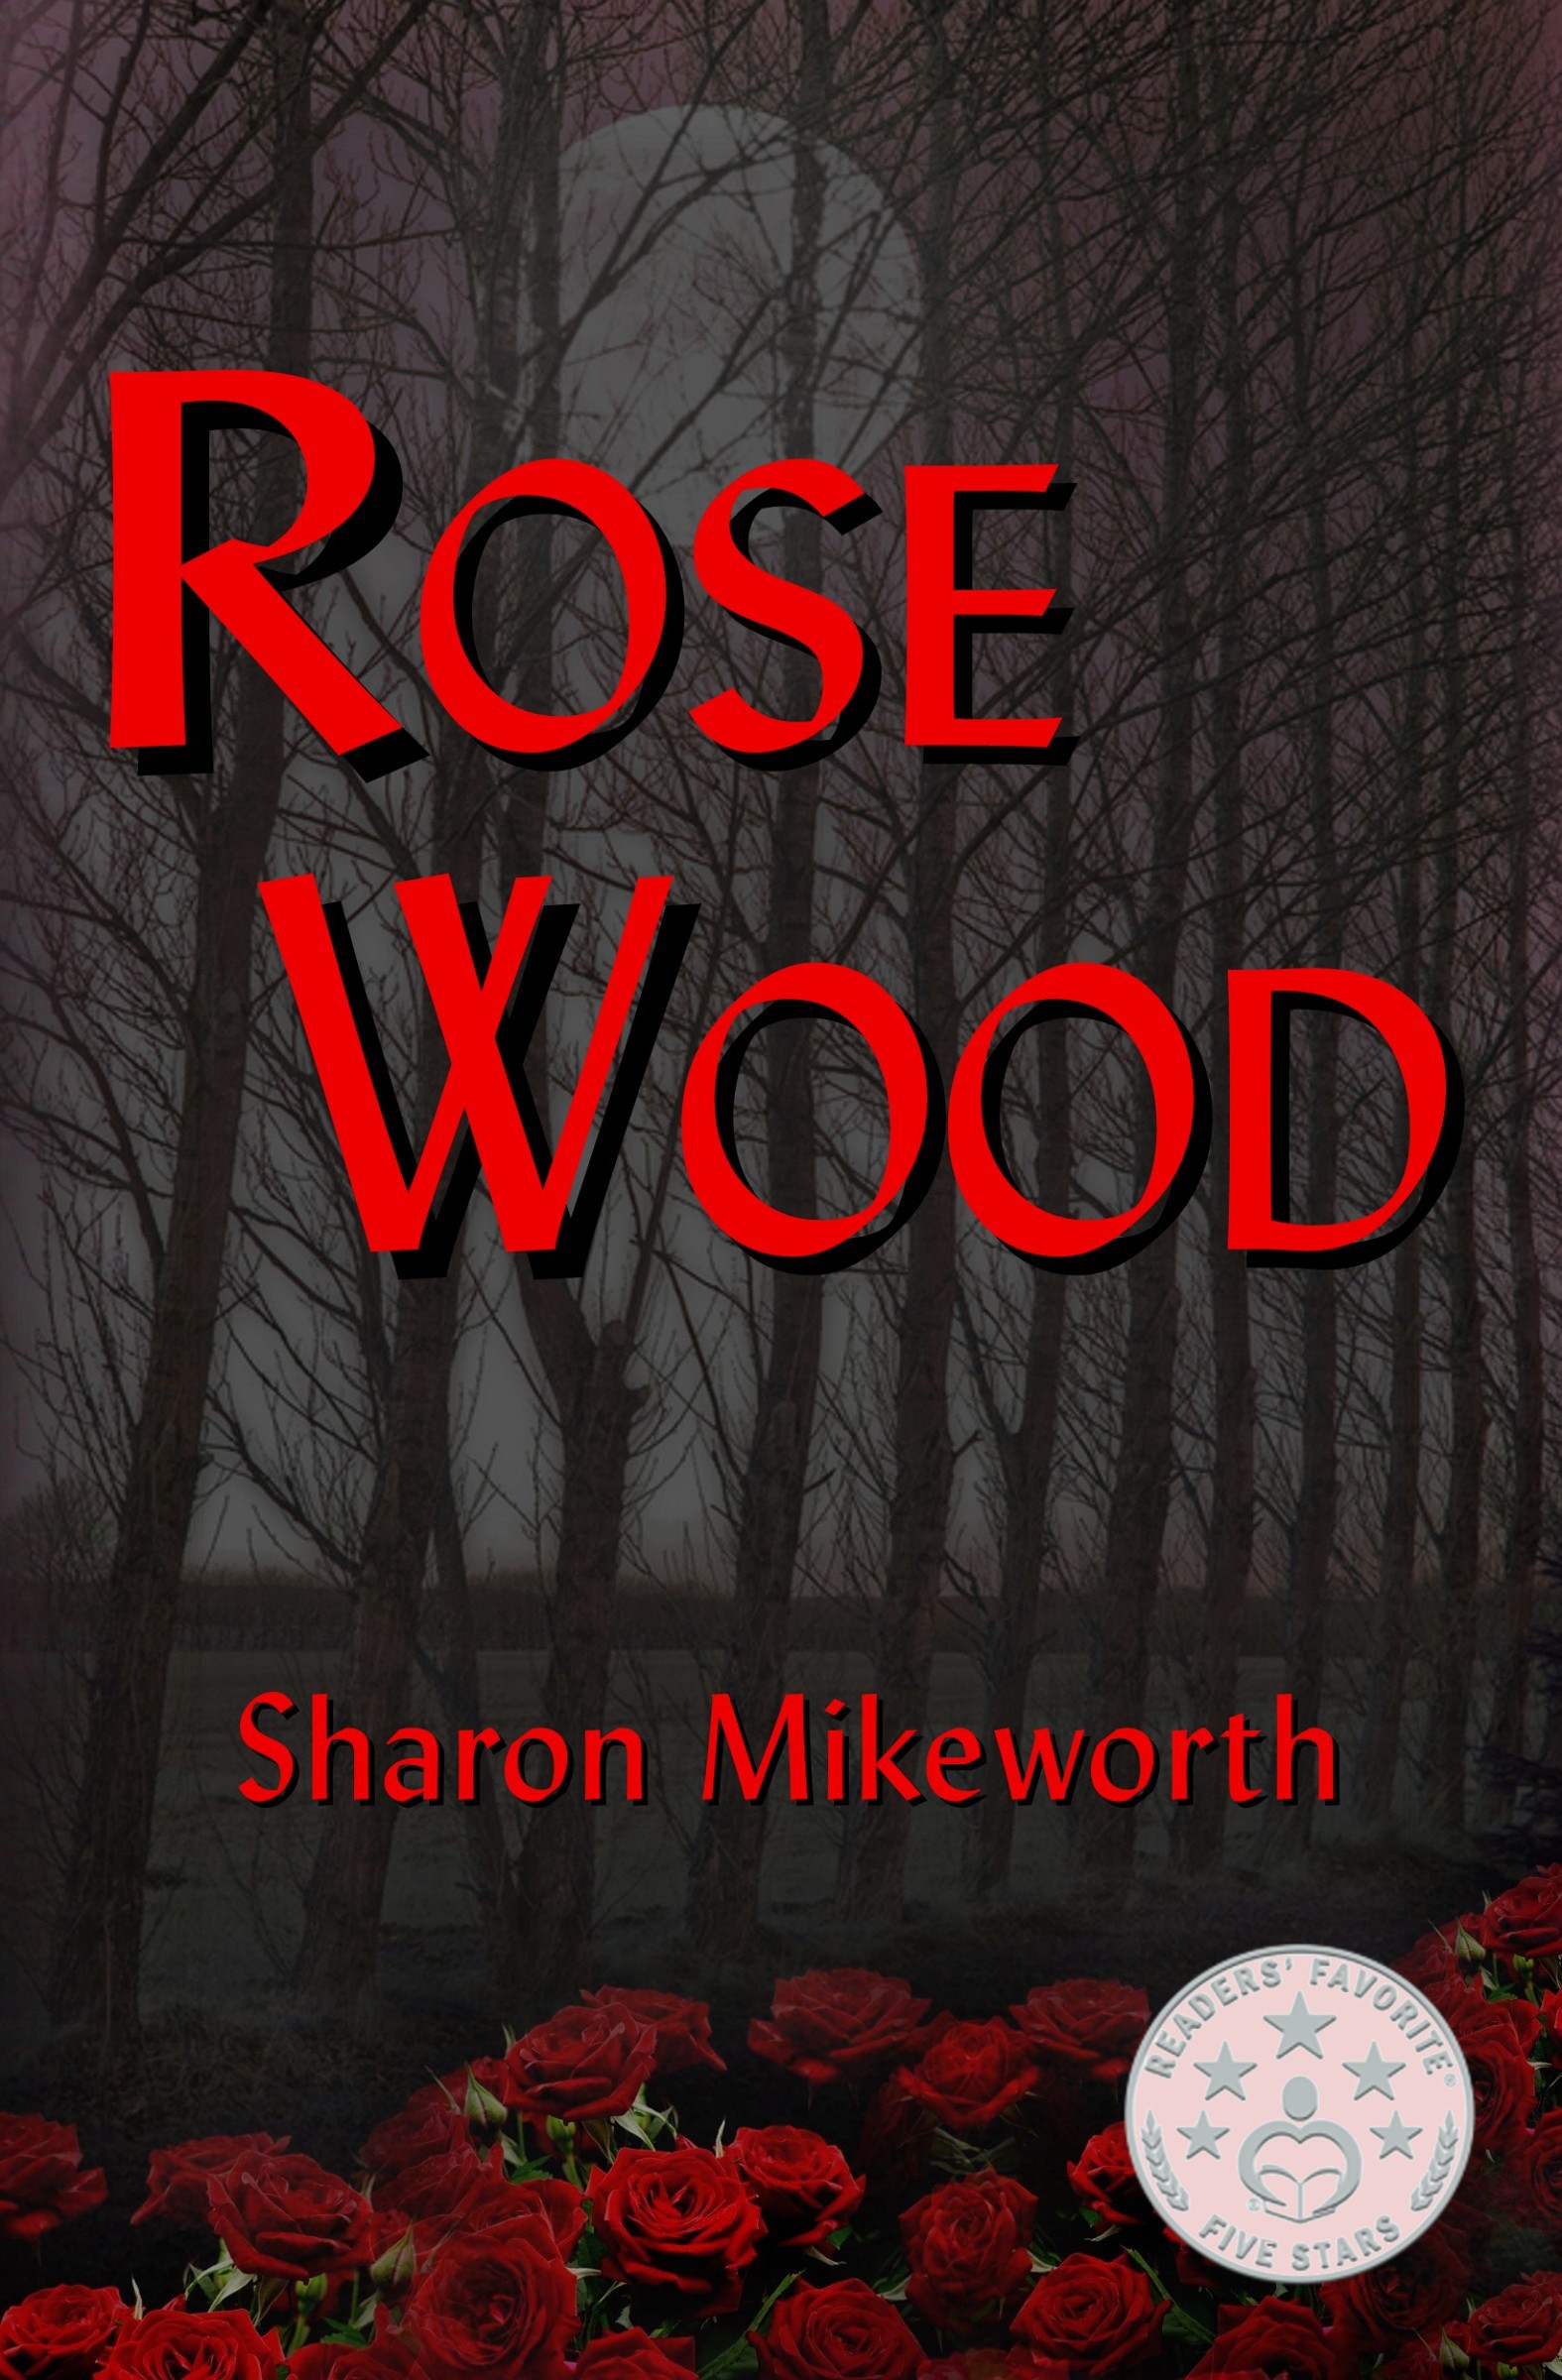 More about Rose Wood